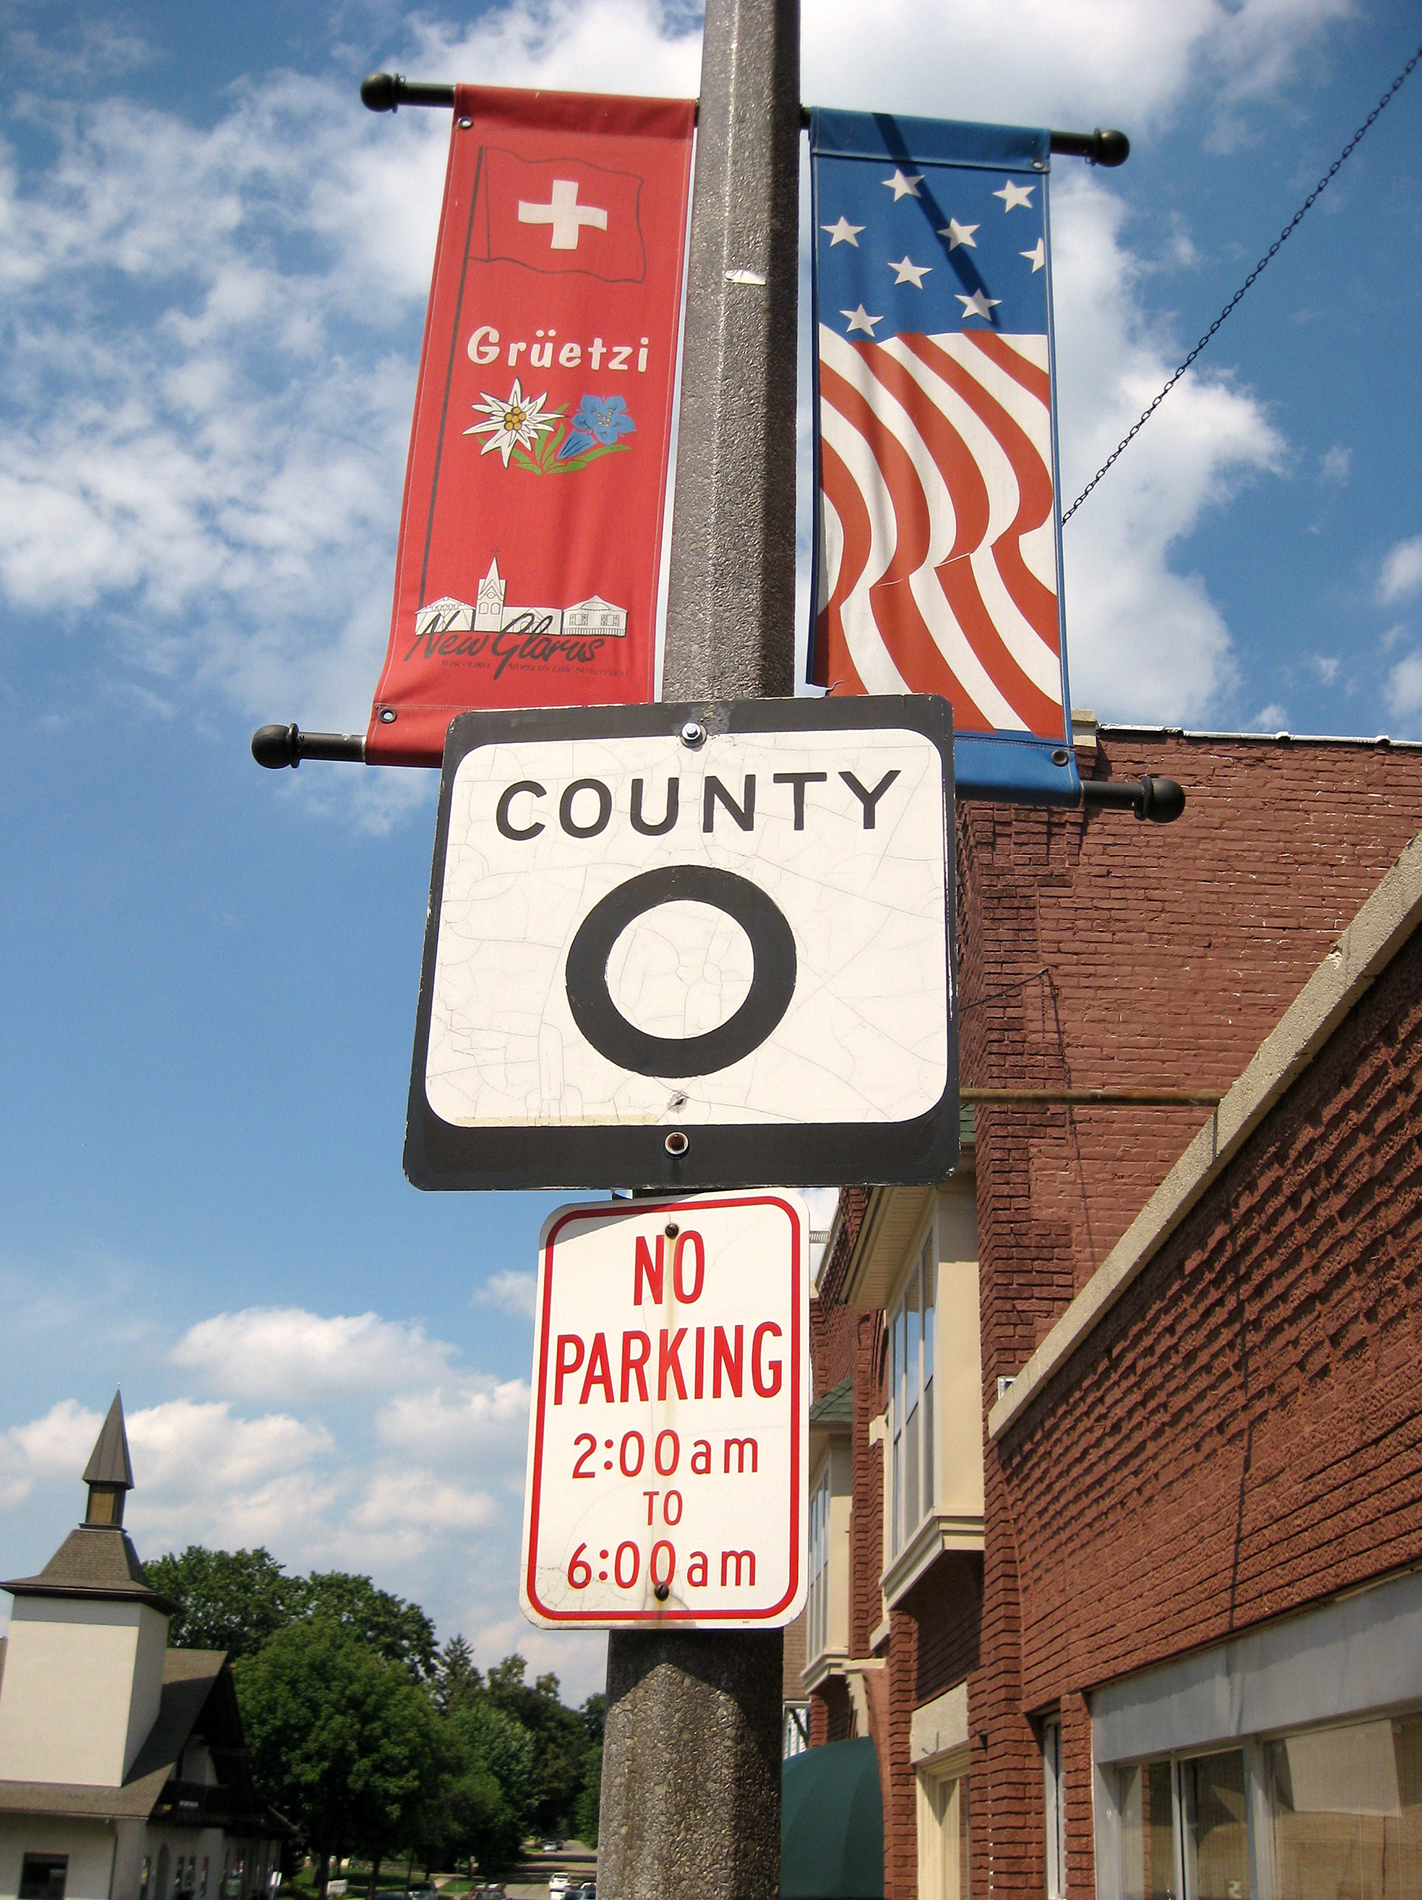 County O road sign